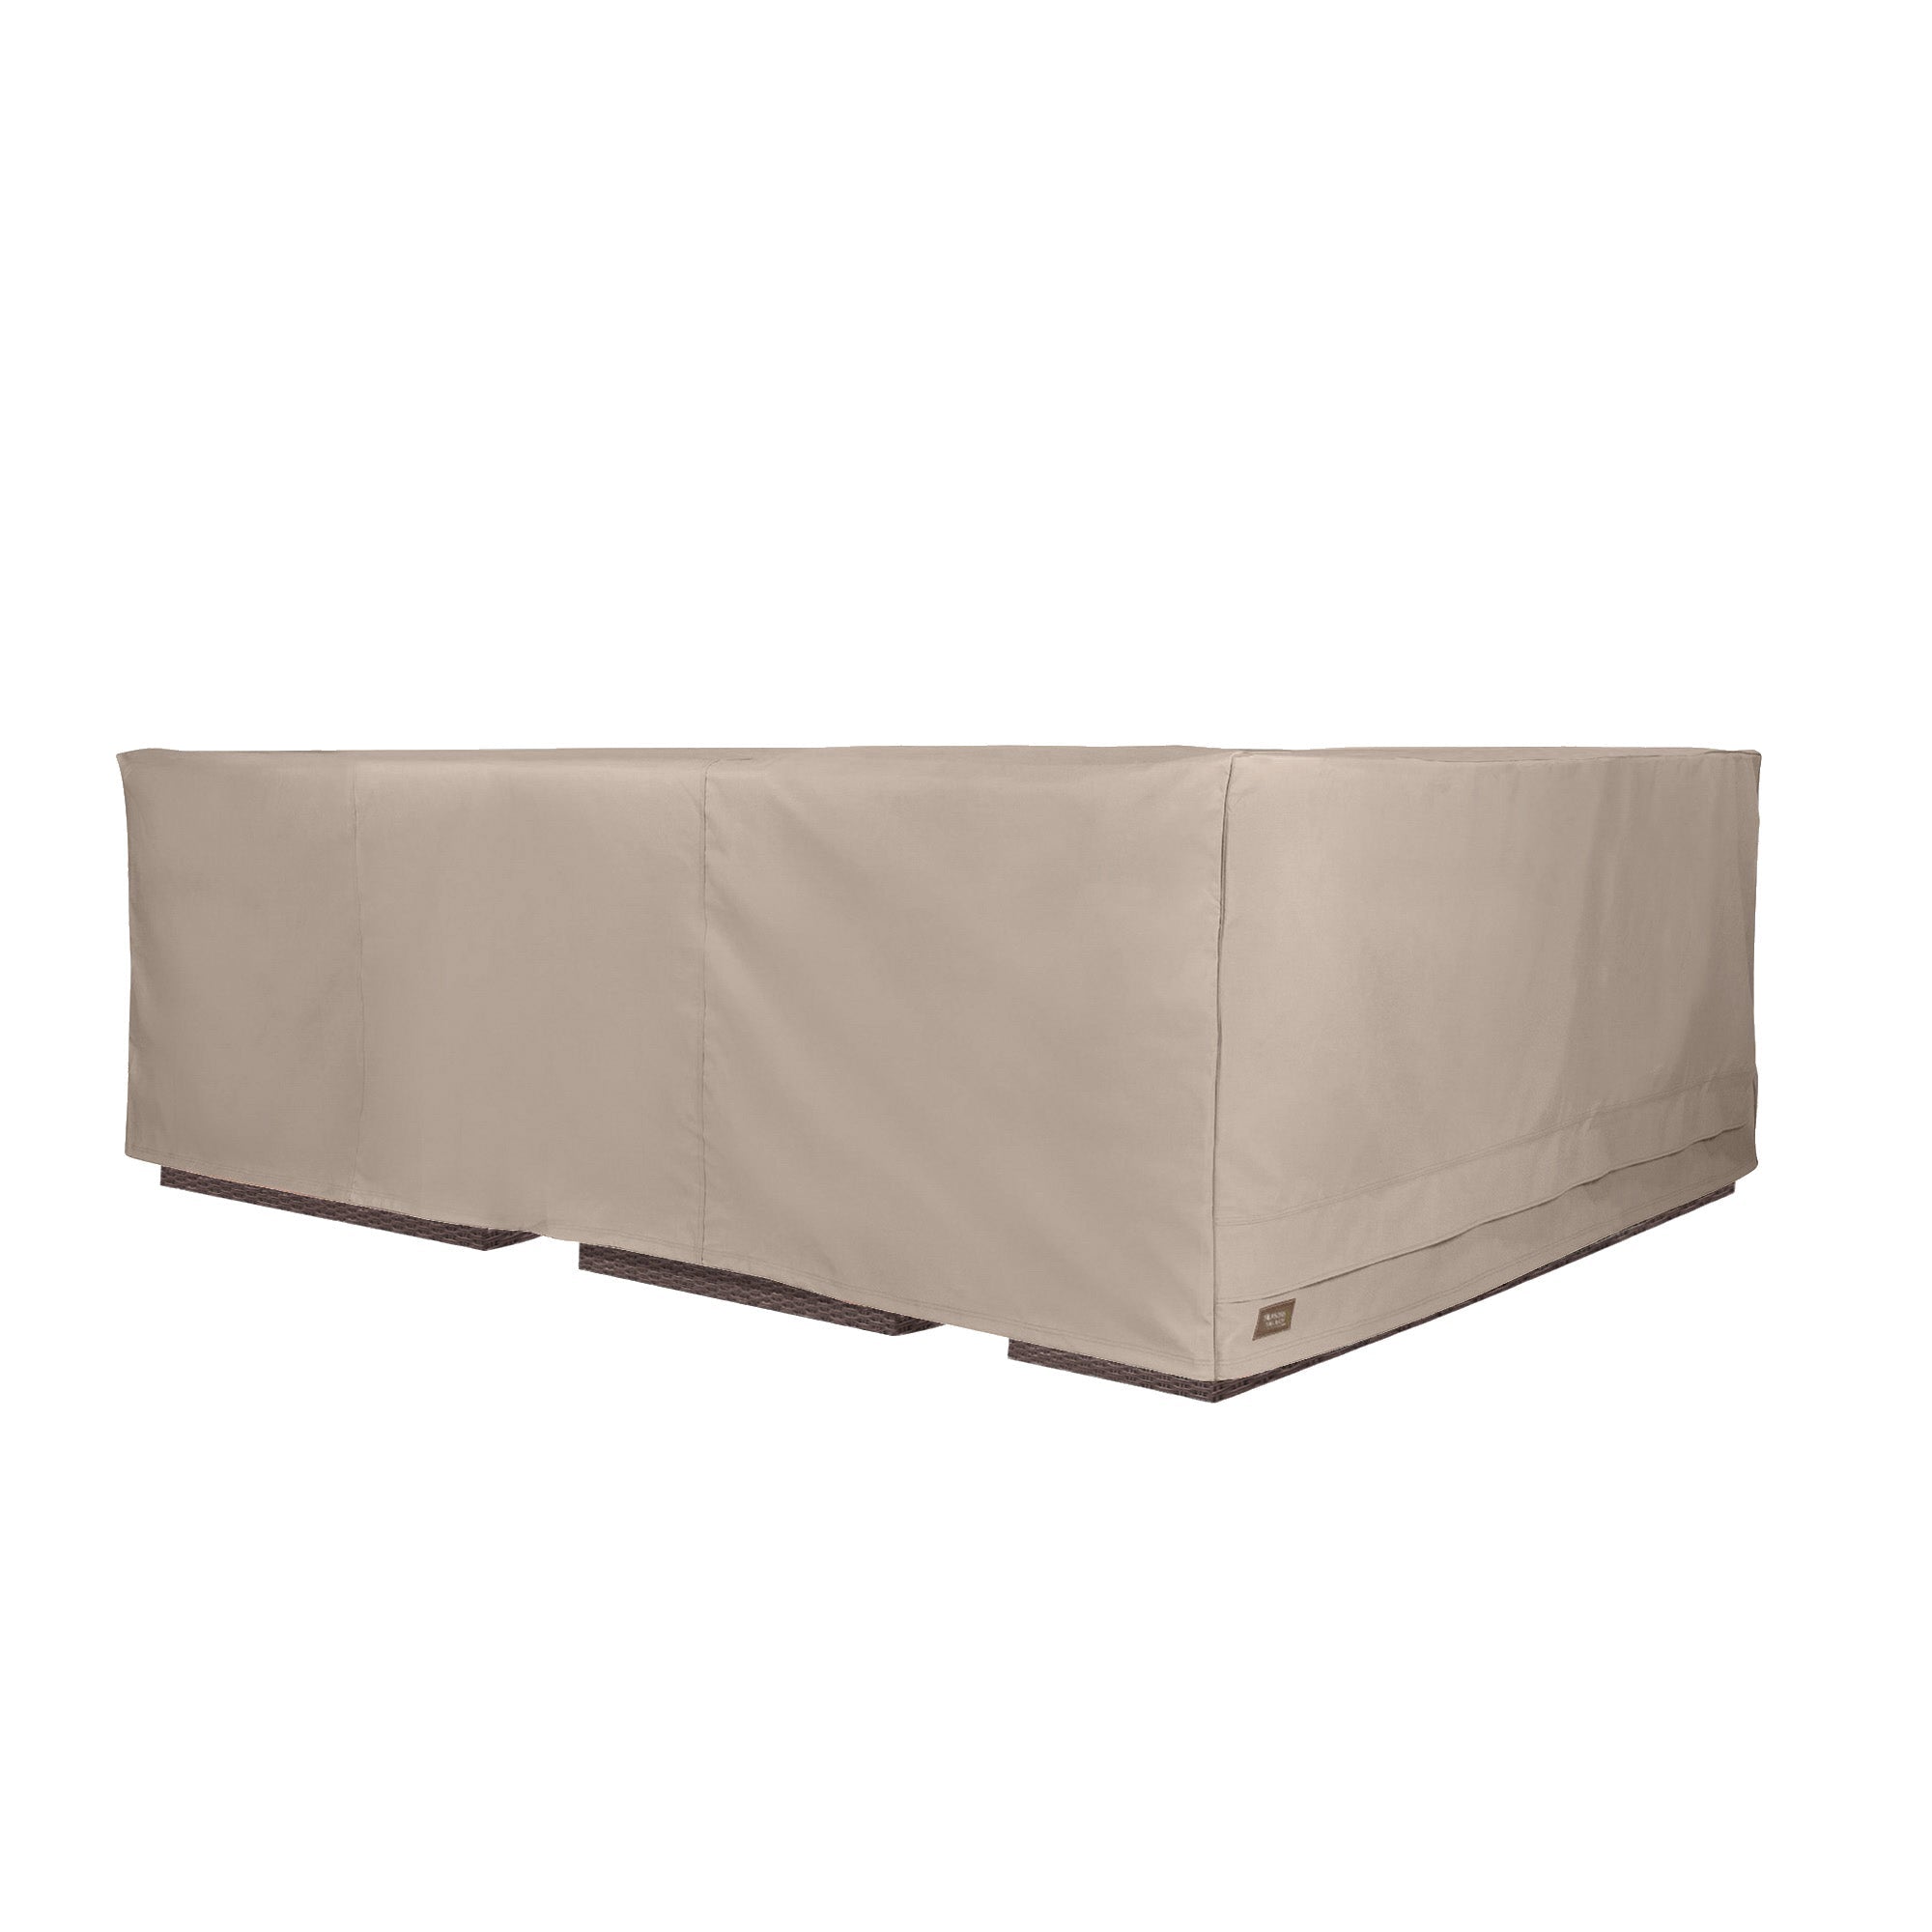 XLG Seating Group Furniture Cover– Atleisureshop